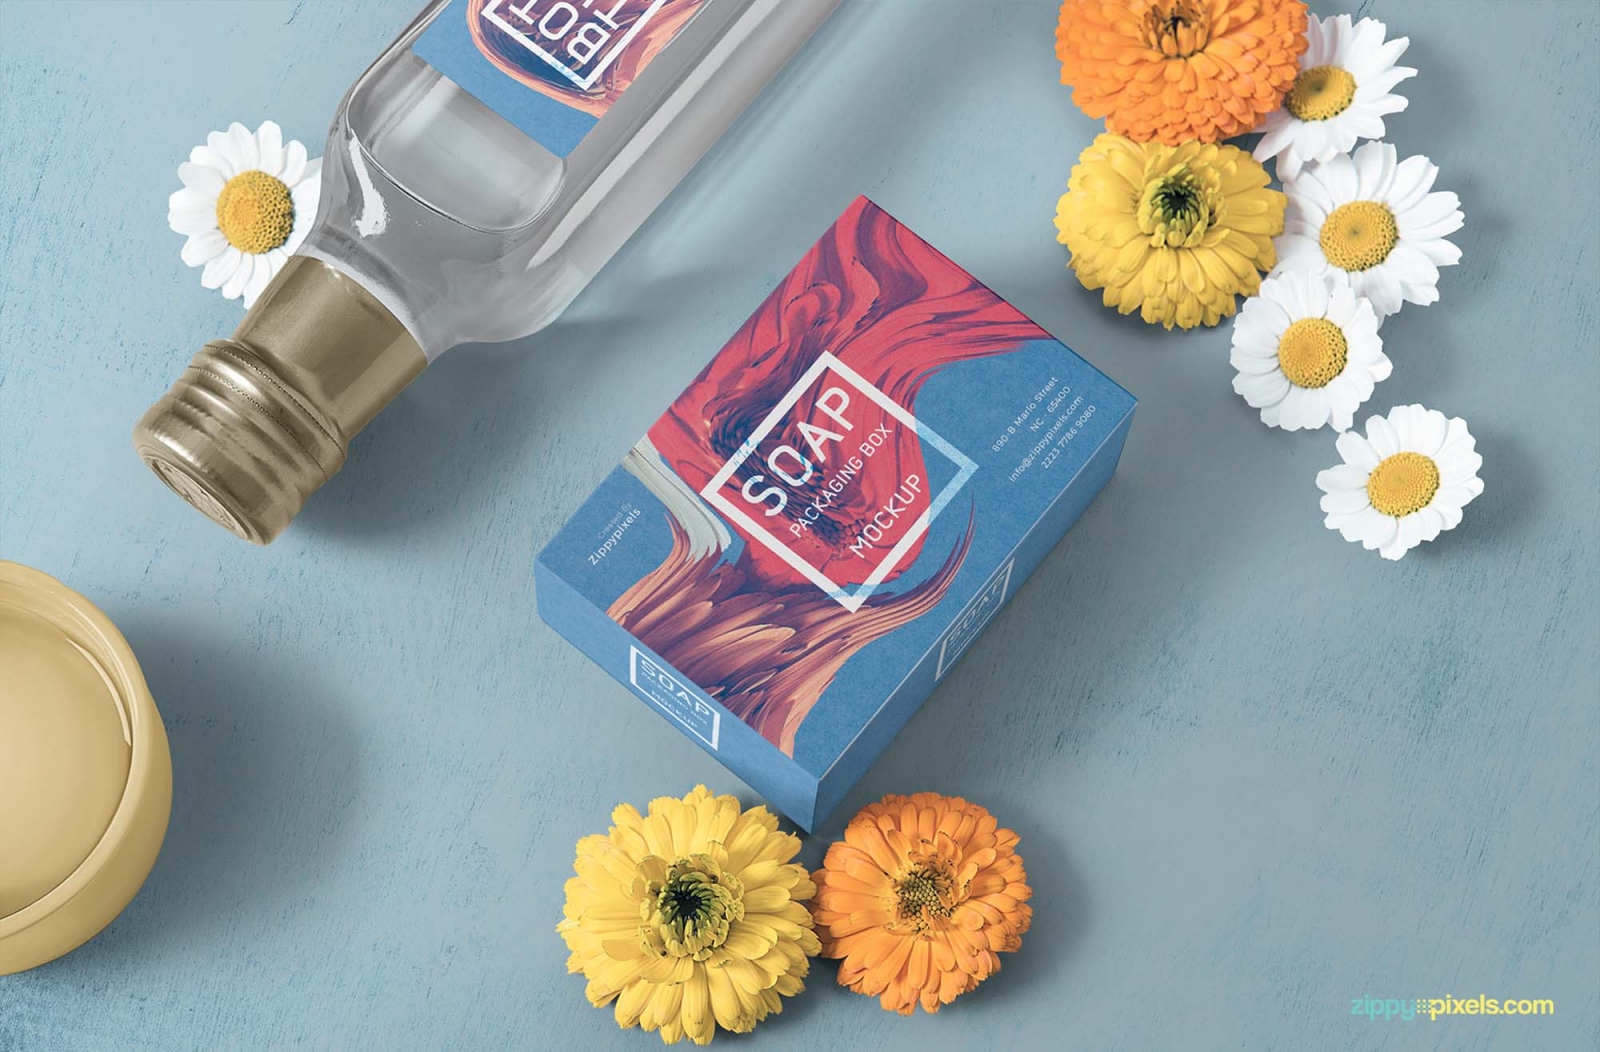 Download Soap Packaging Mockup PSD - Free Download